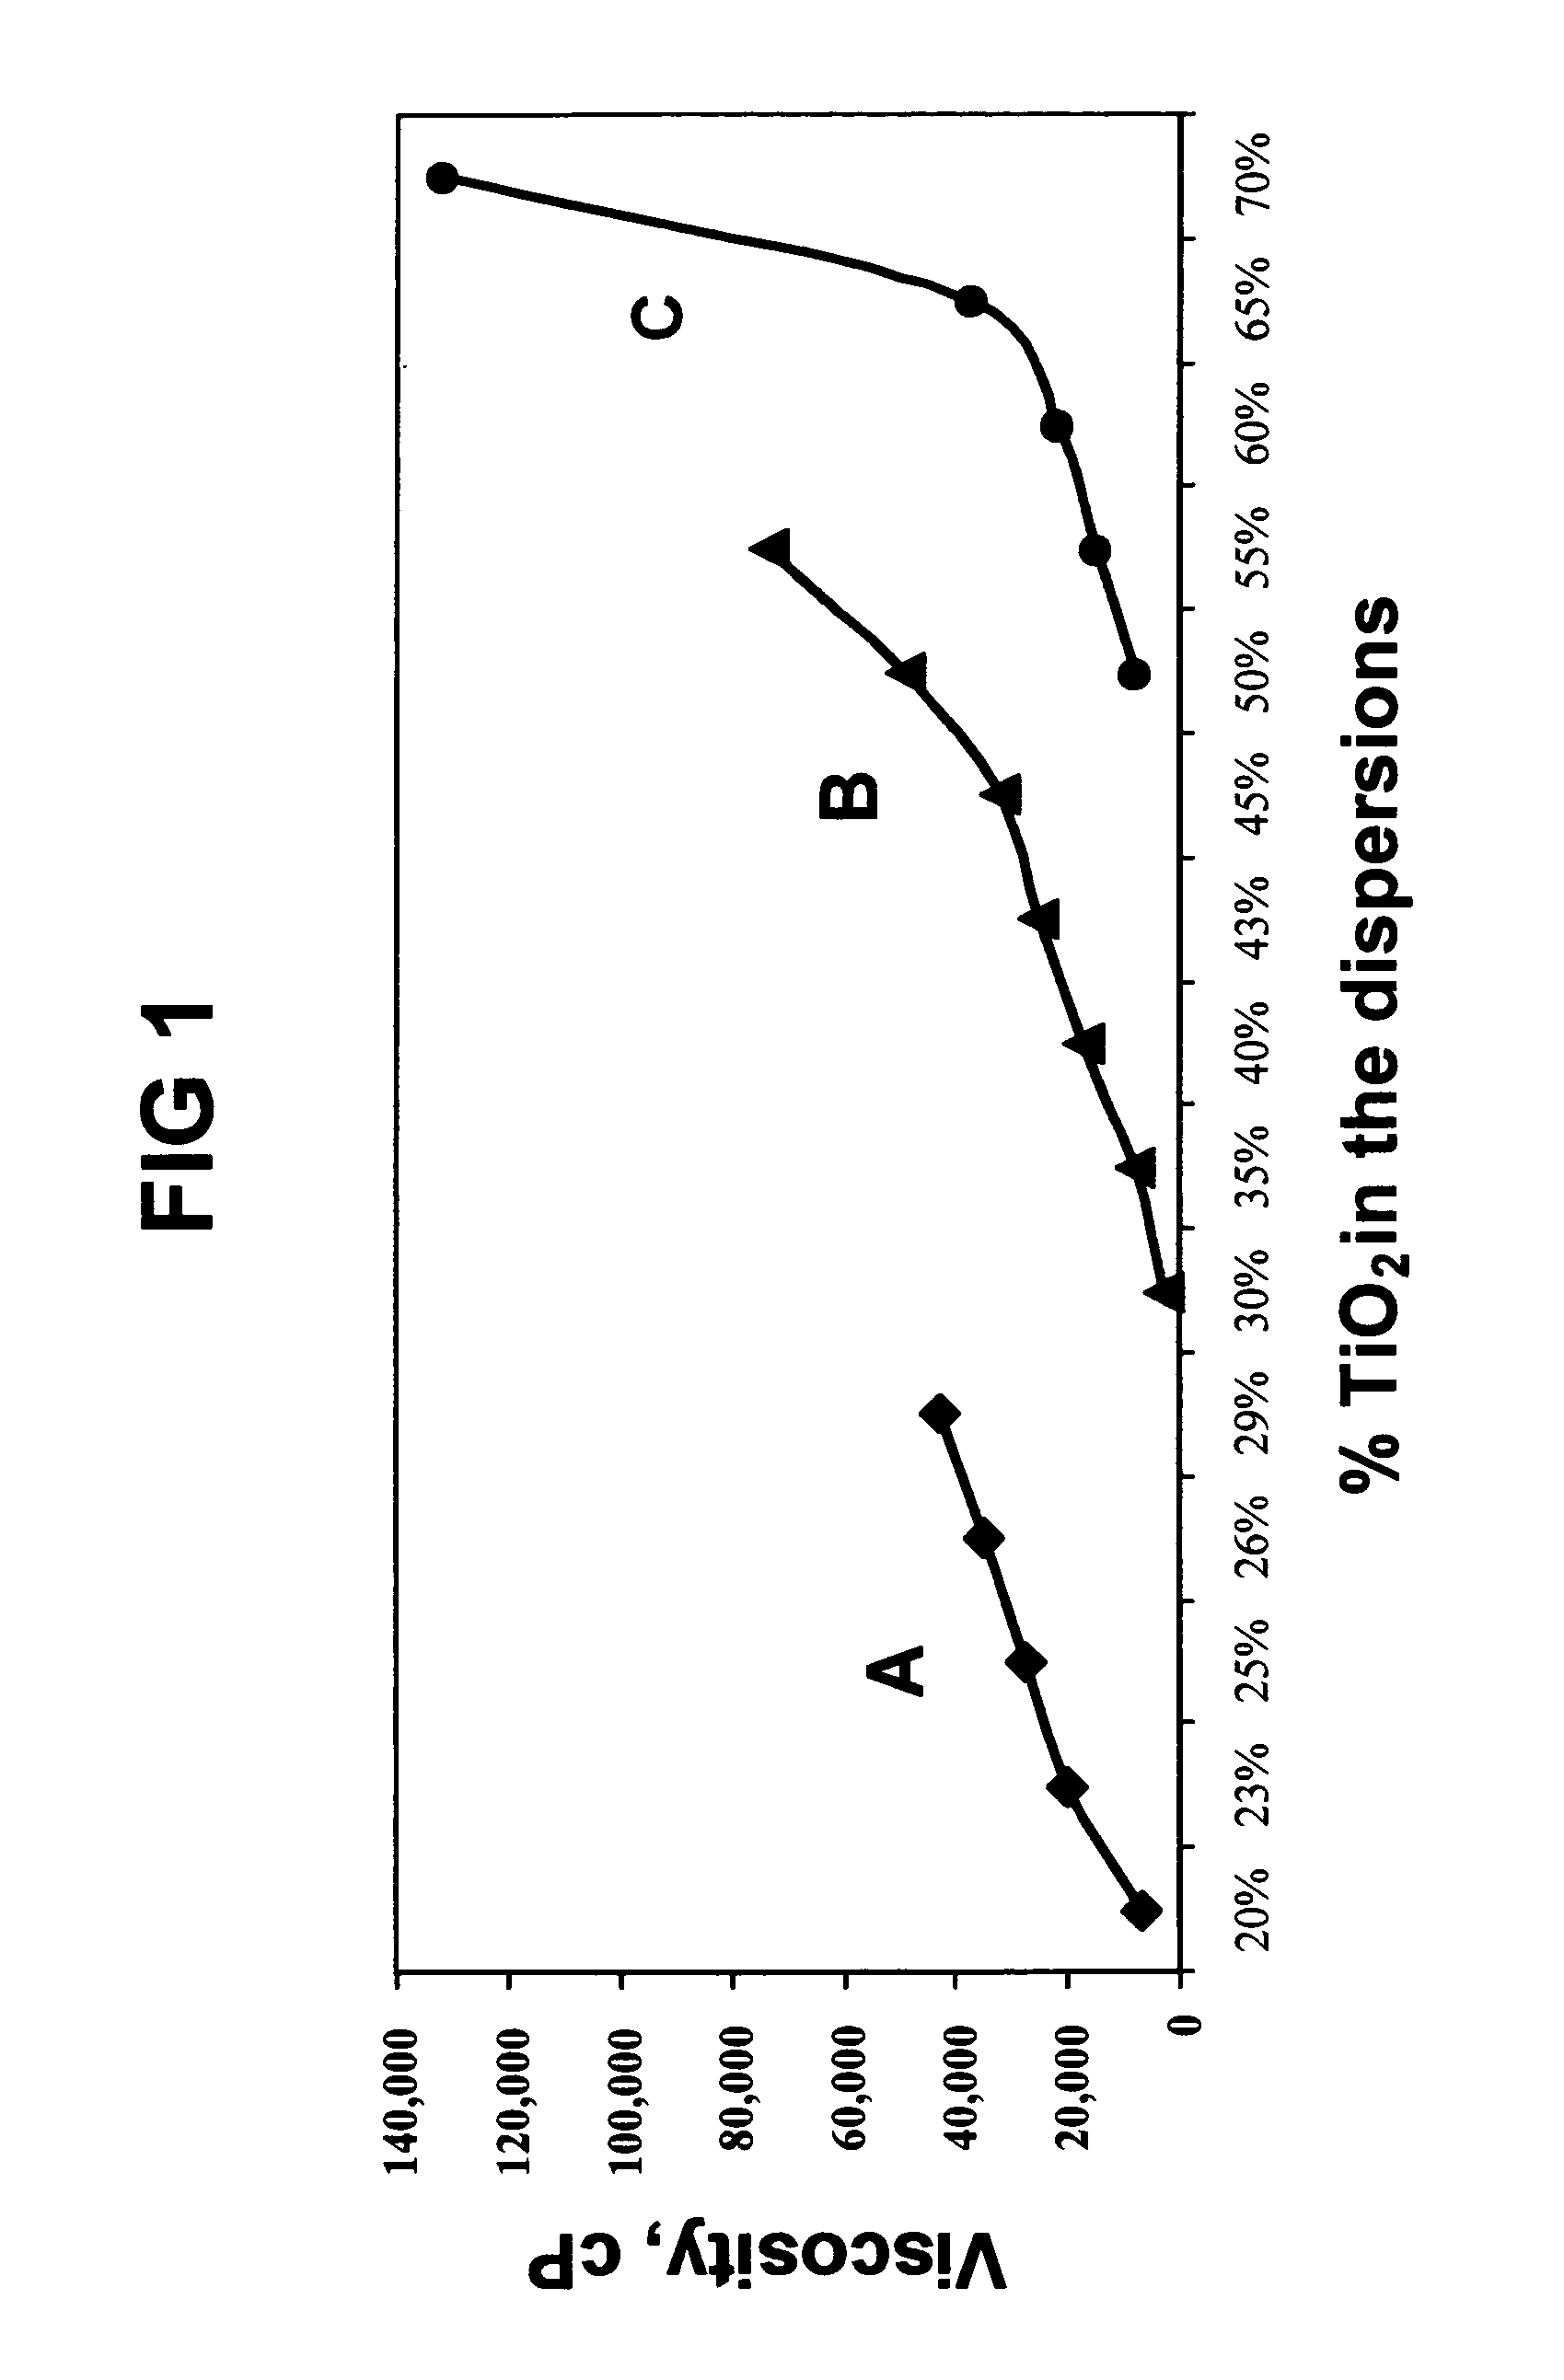 Method and compositions for dispersing particulate solids in oil